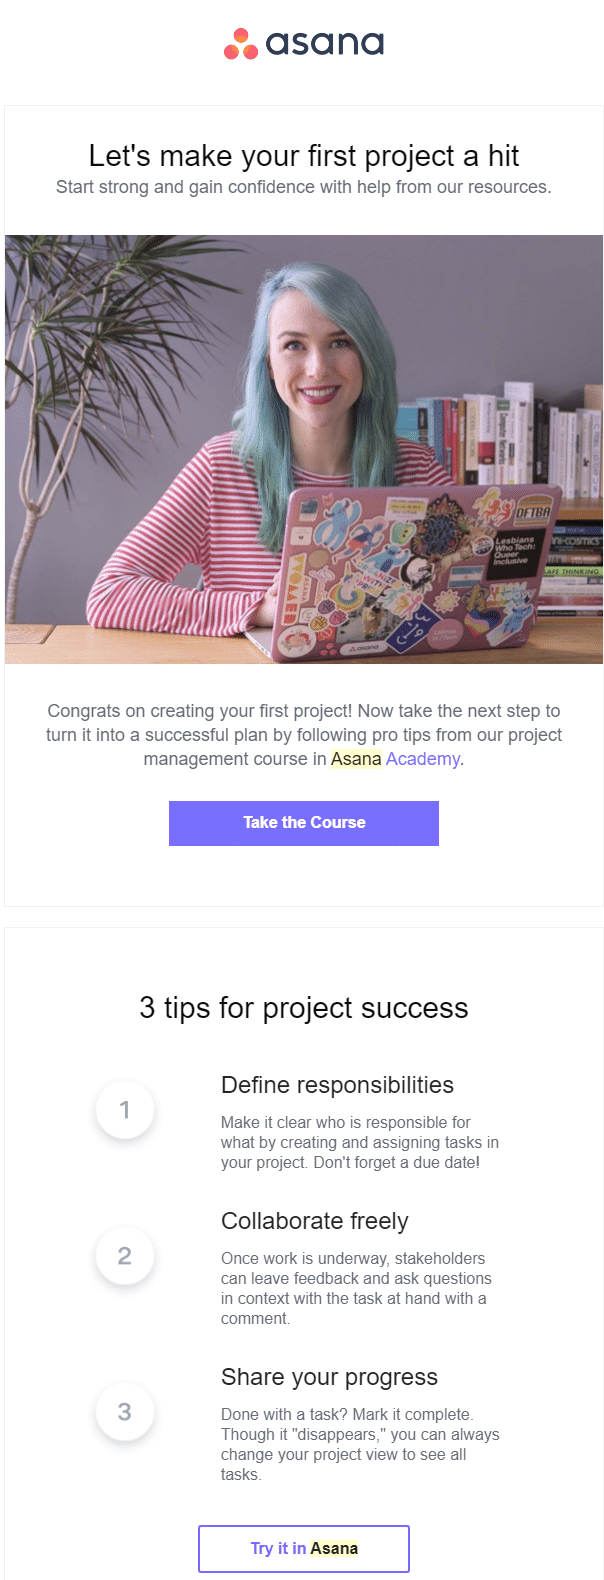 Email Drip Campaigns: Why They're So Powerful [With Examples] 2